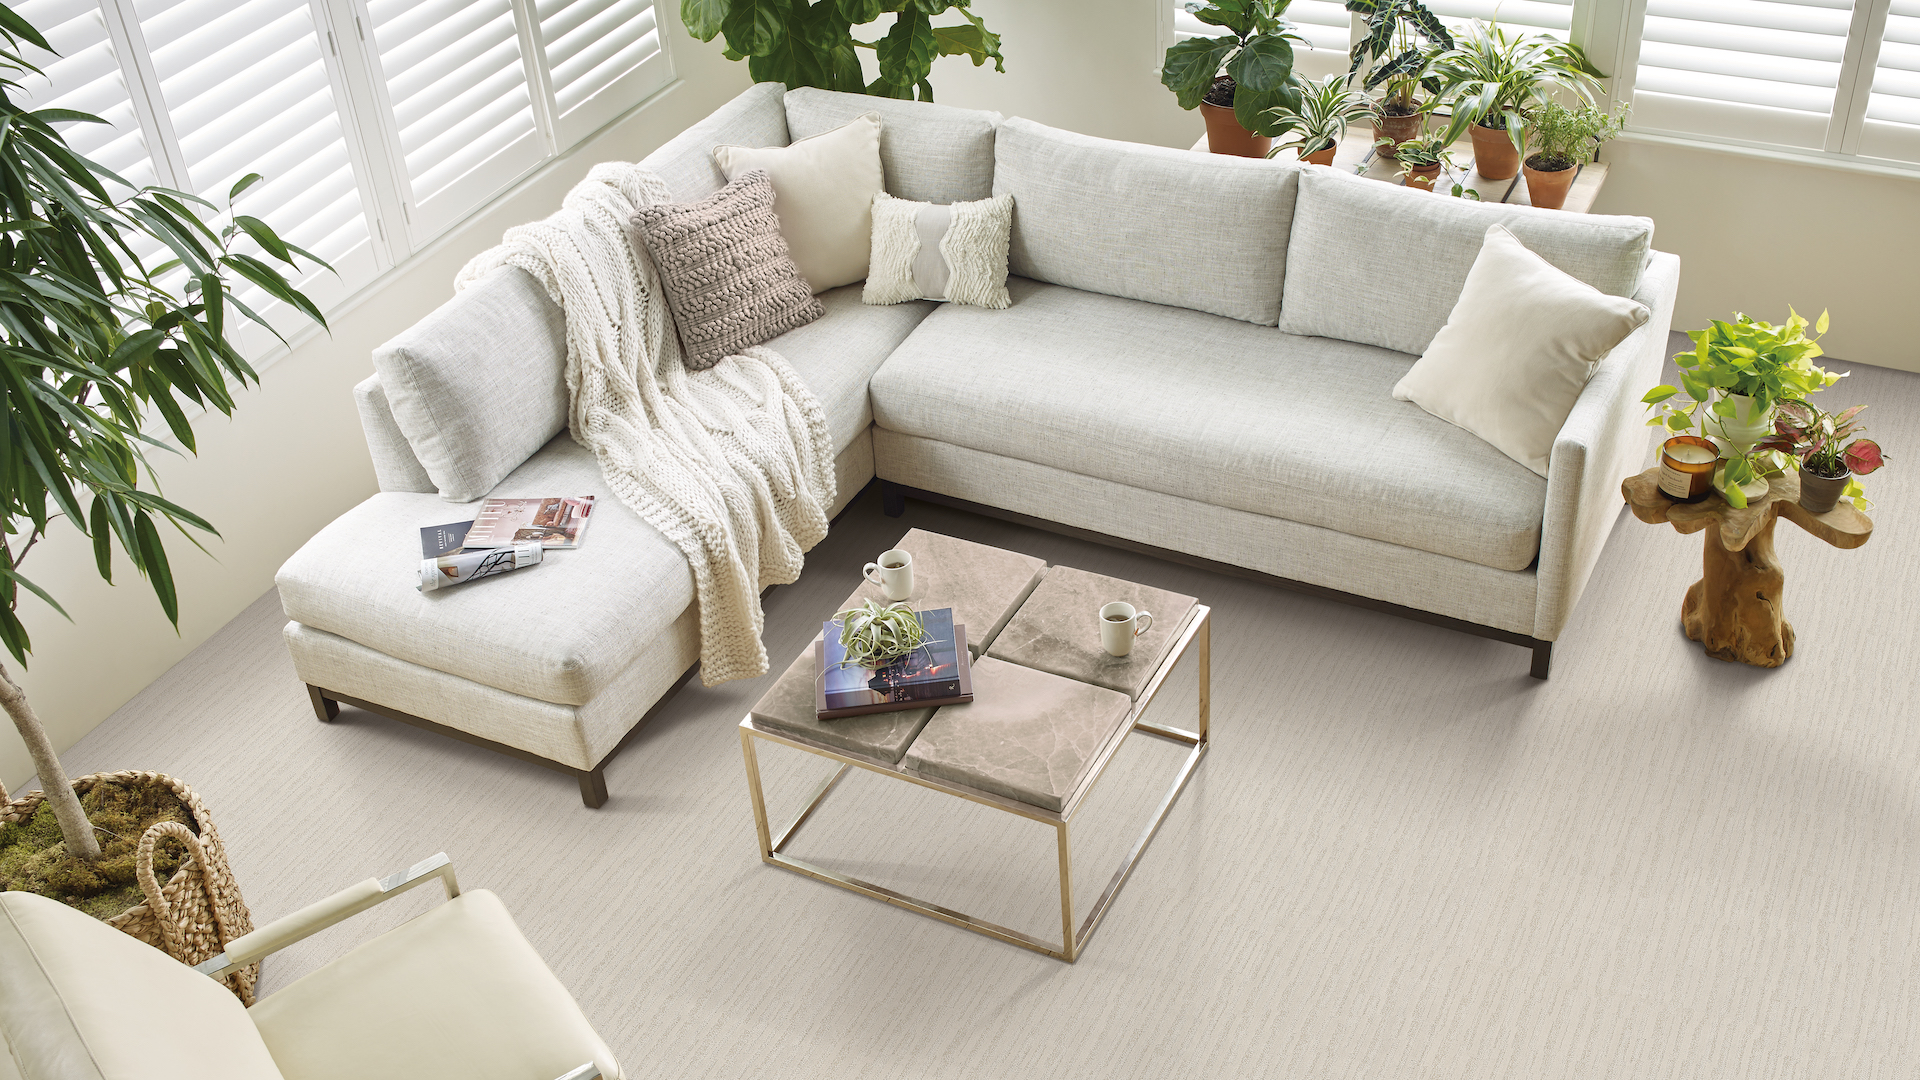 soft white carpets in an earth toned living room